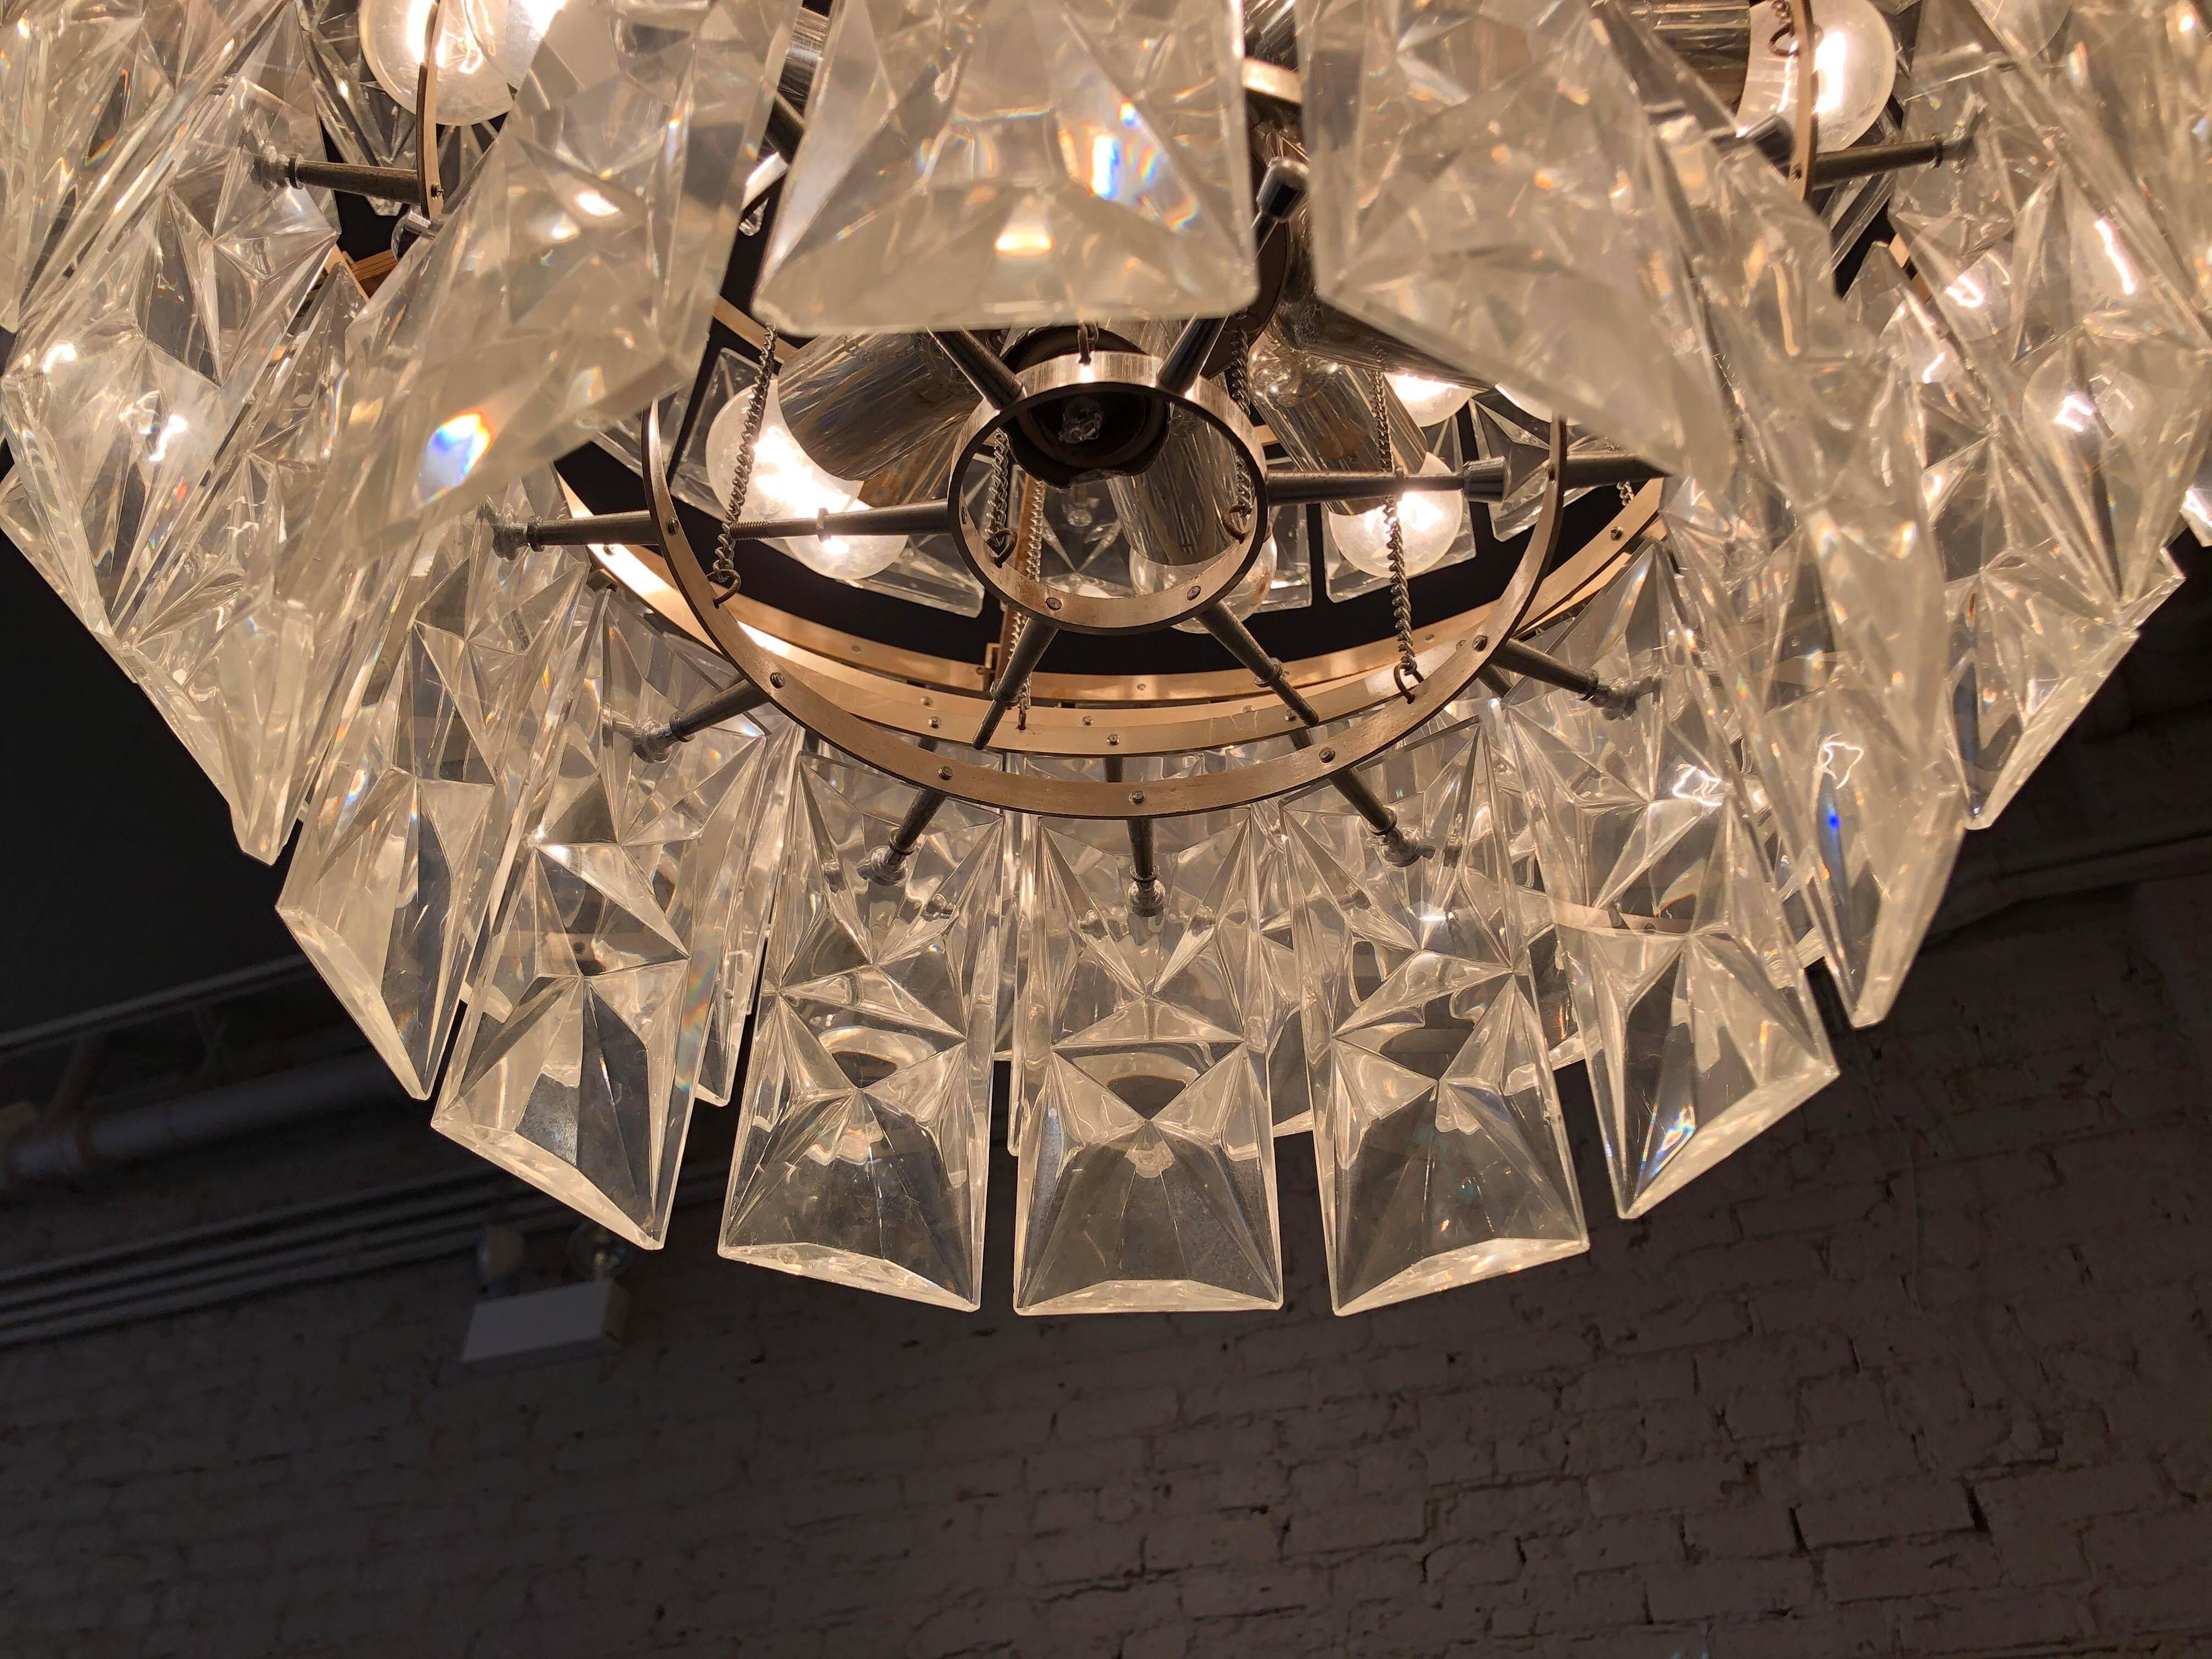 Gorgeous chandelier made of huge glass crystals. Each piece is screwed in place with fasteners. The chandelier was missing a few hard to find crystals so the previous owner was clever in removing the innermost tier crystals to replace the missing